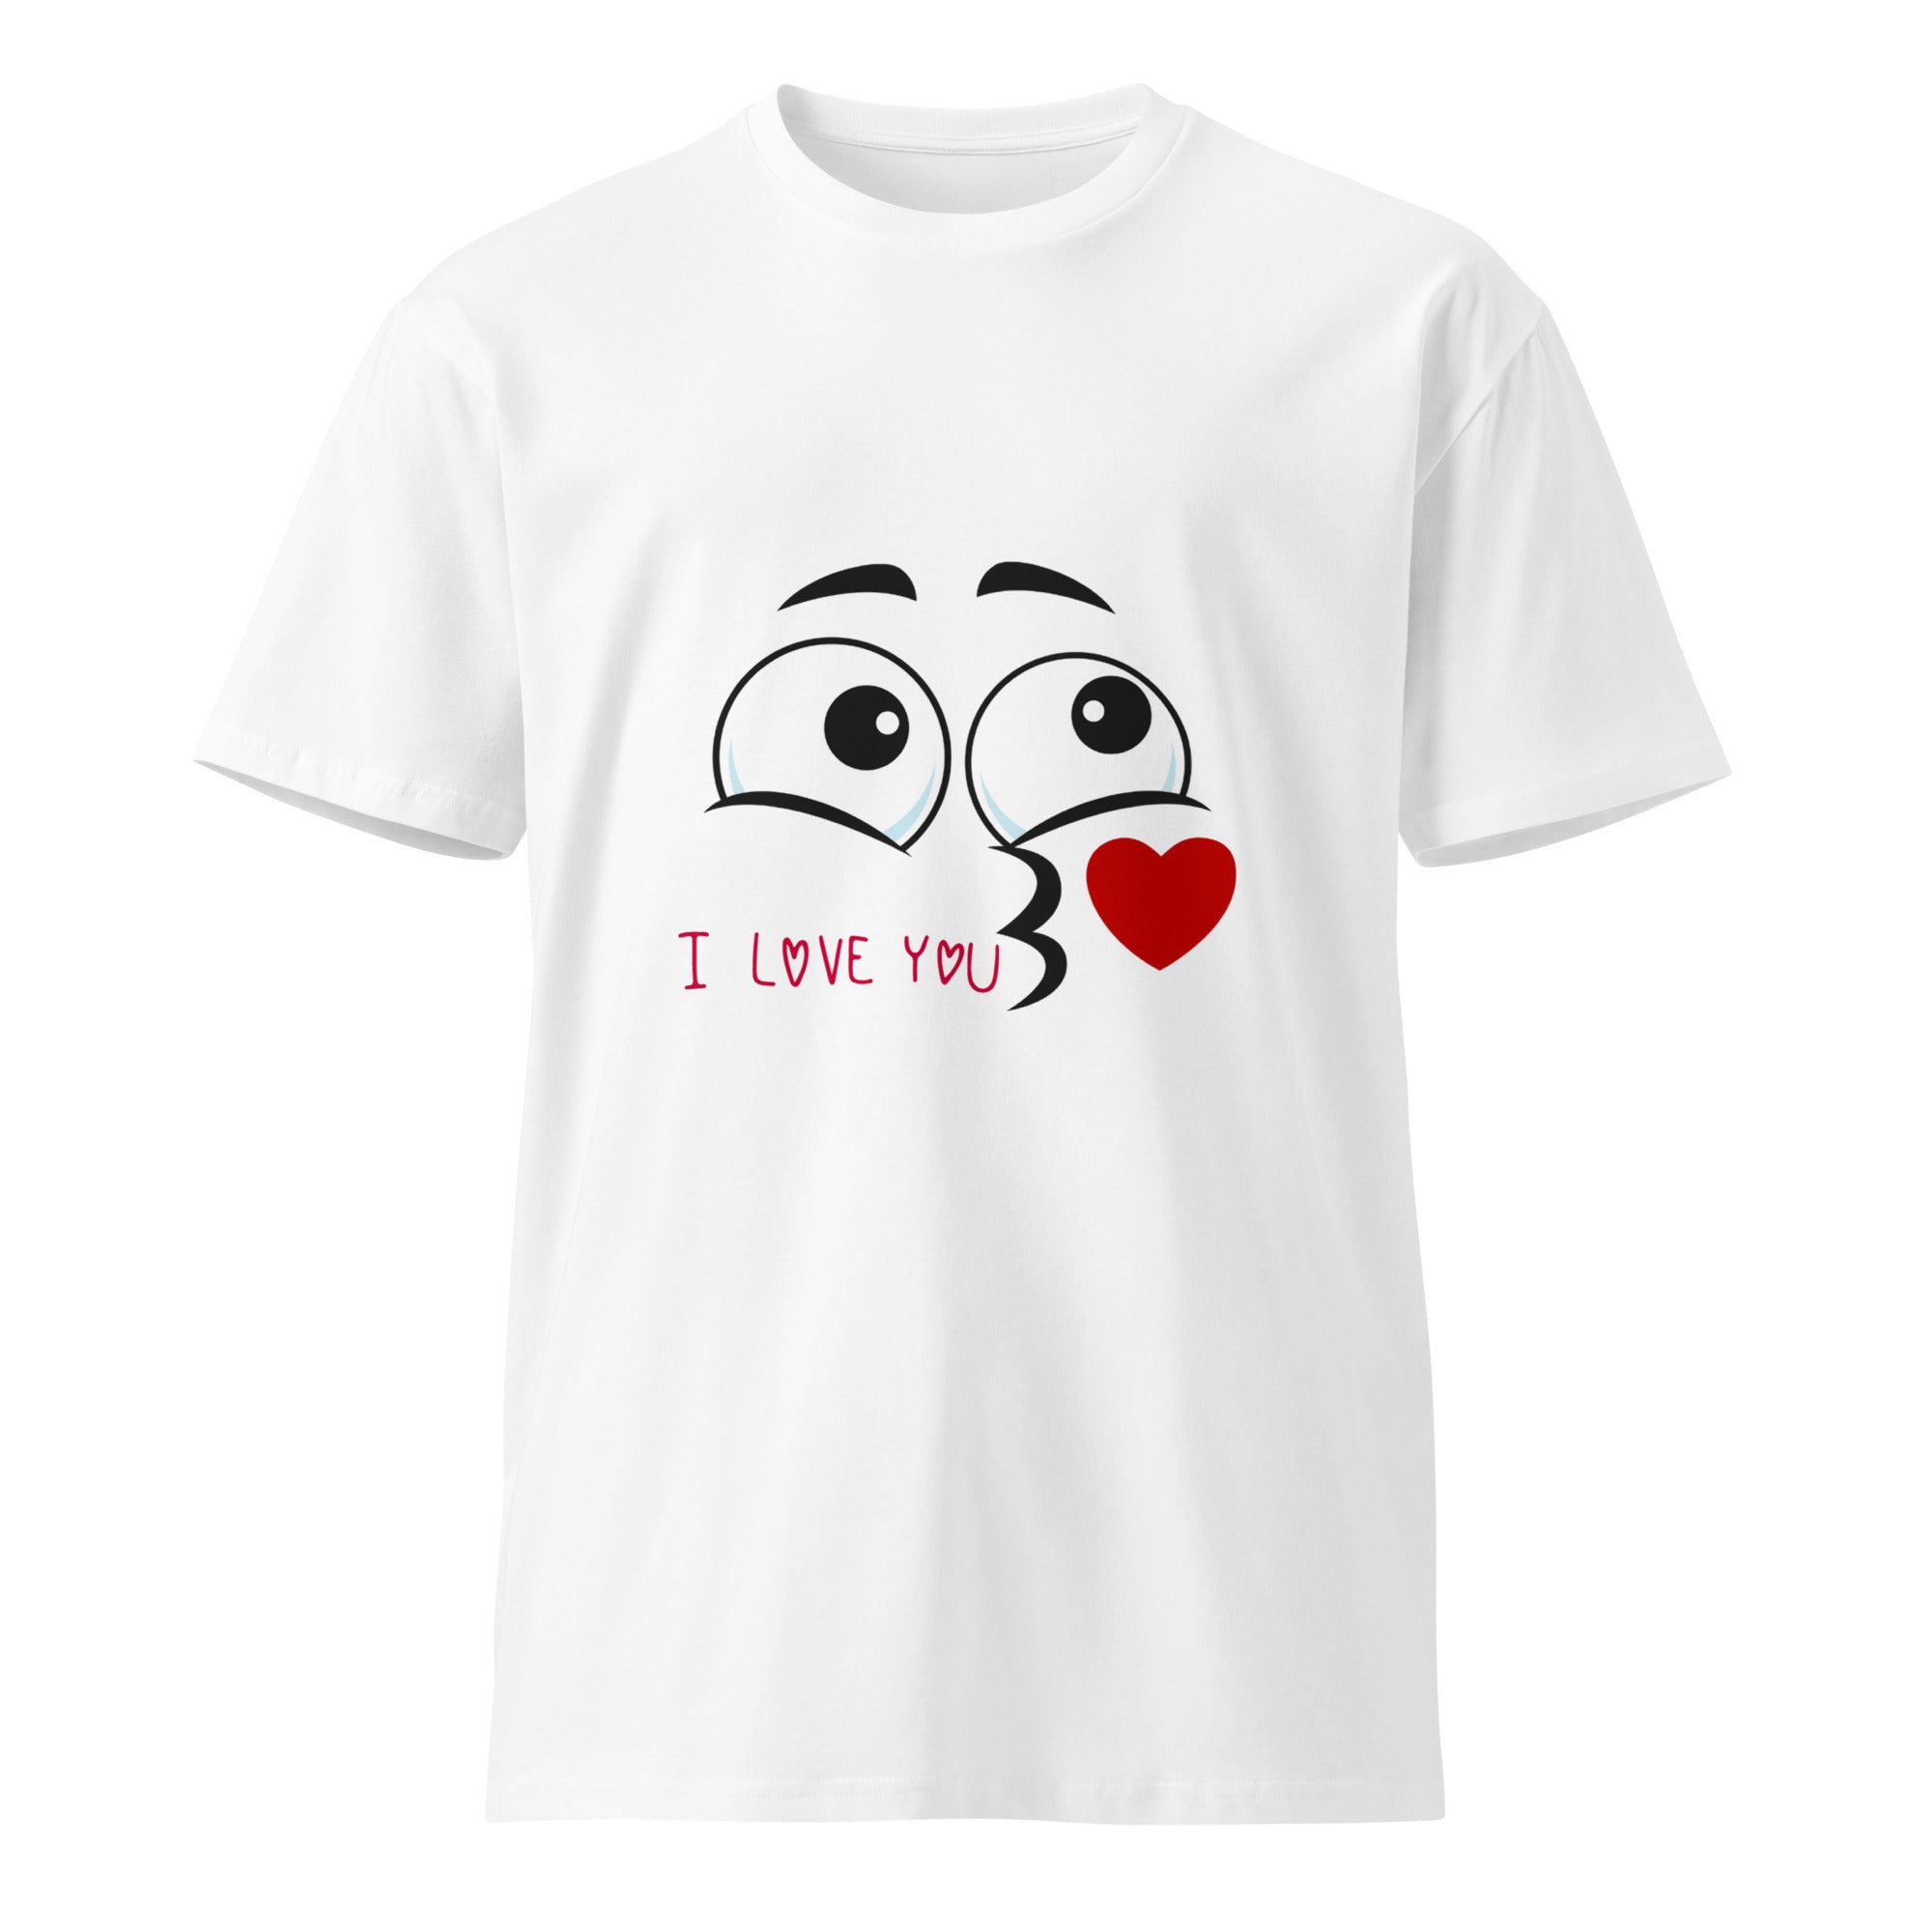 I LOVE YOU T-SHIRT FOR HIM